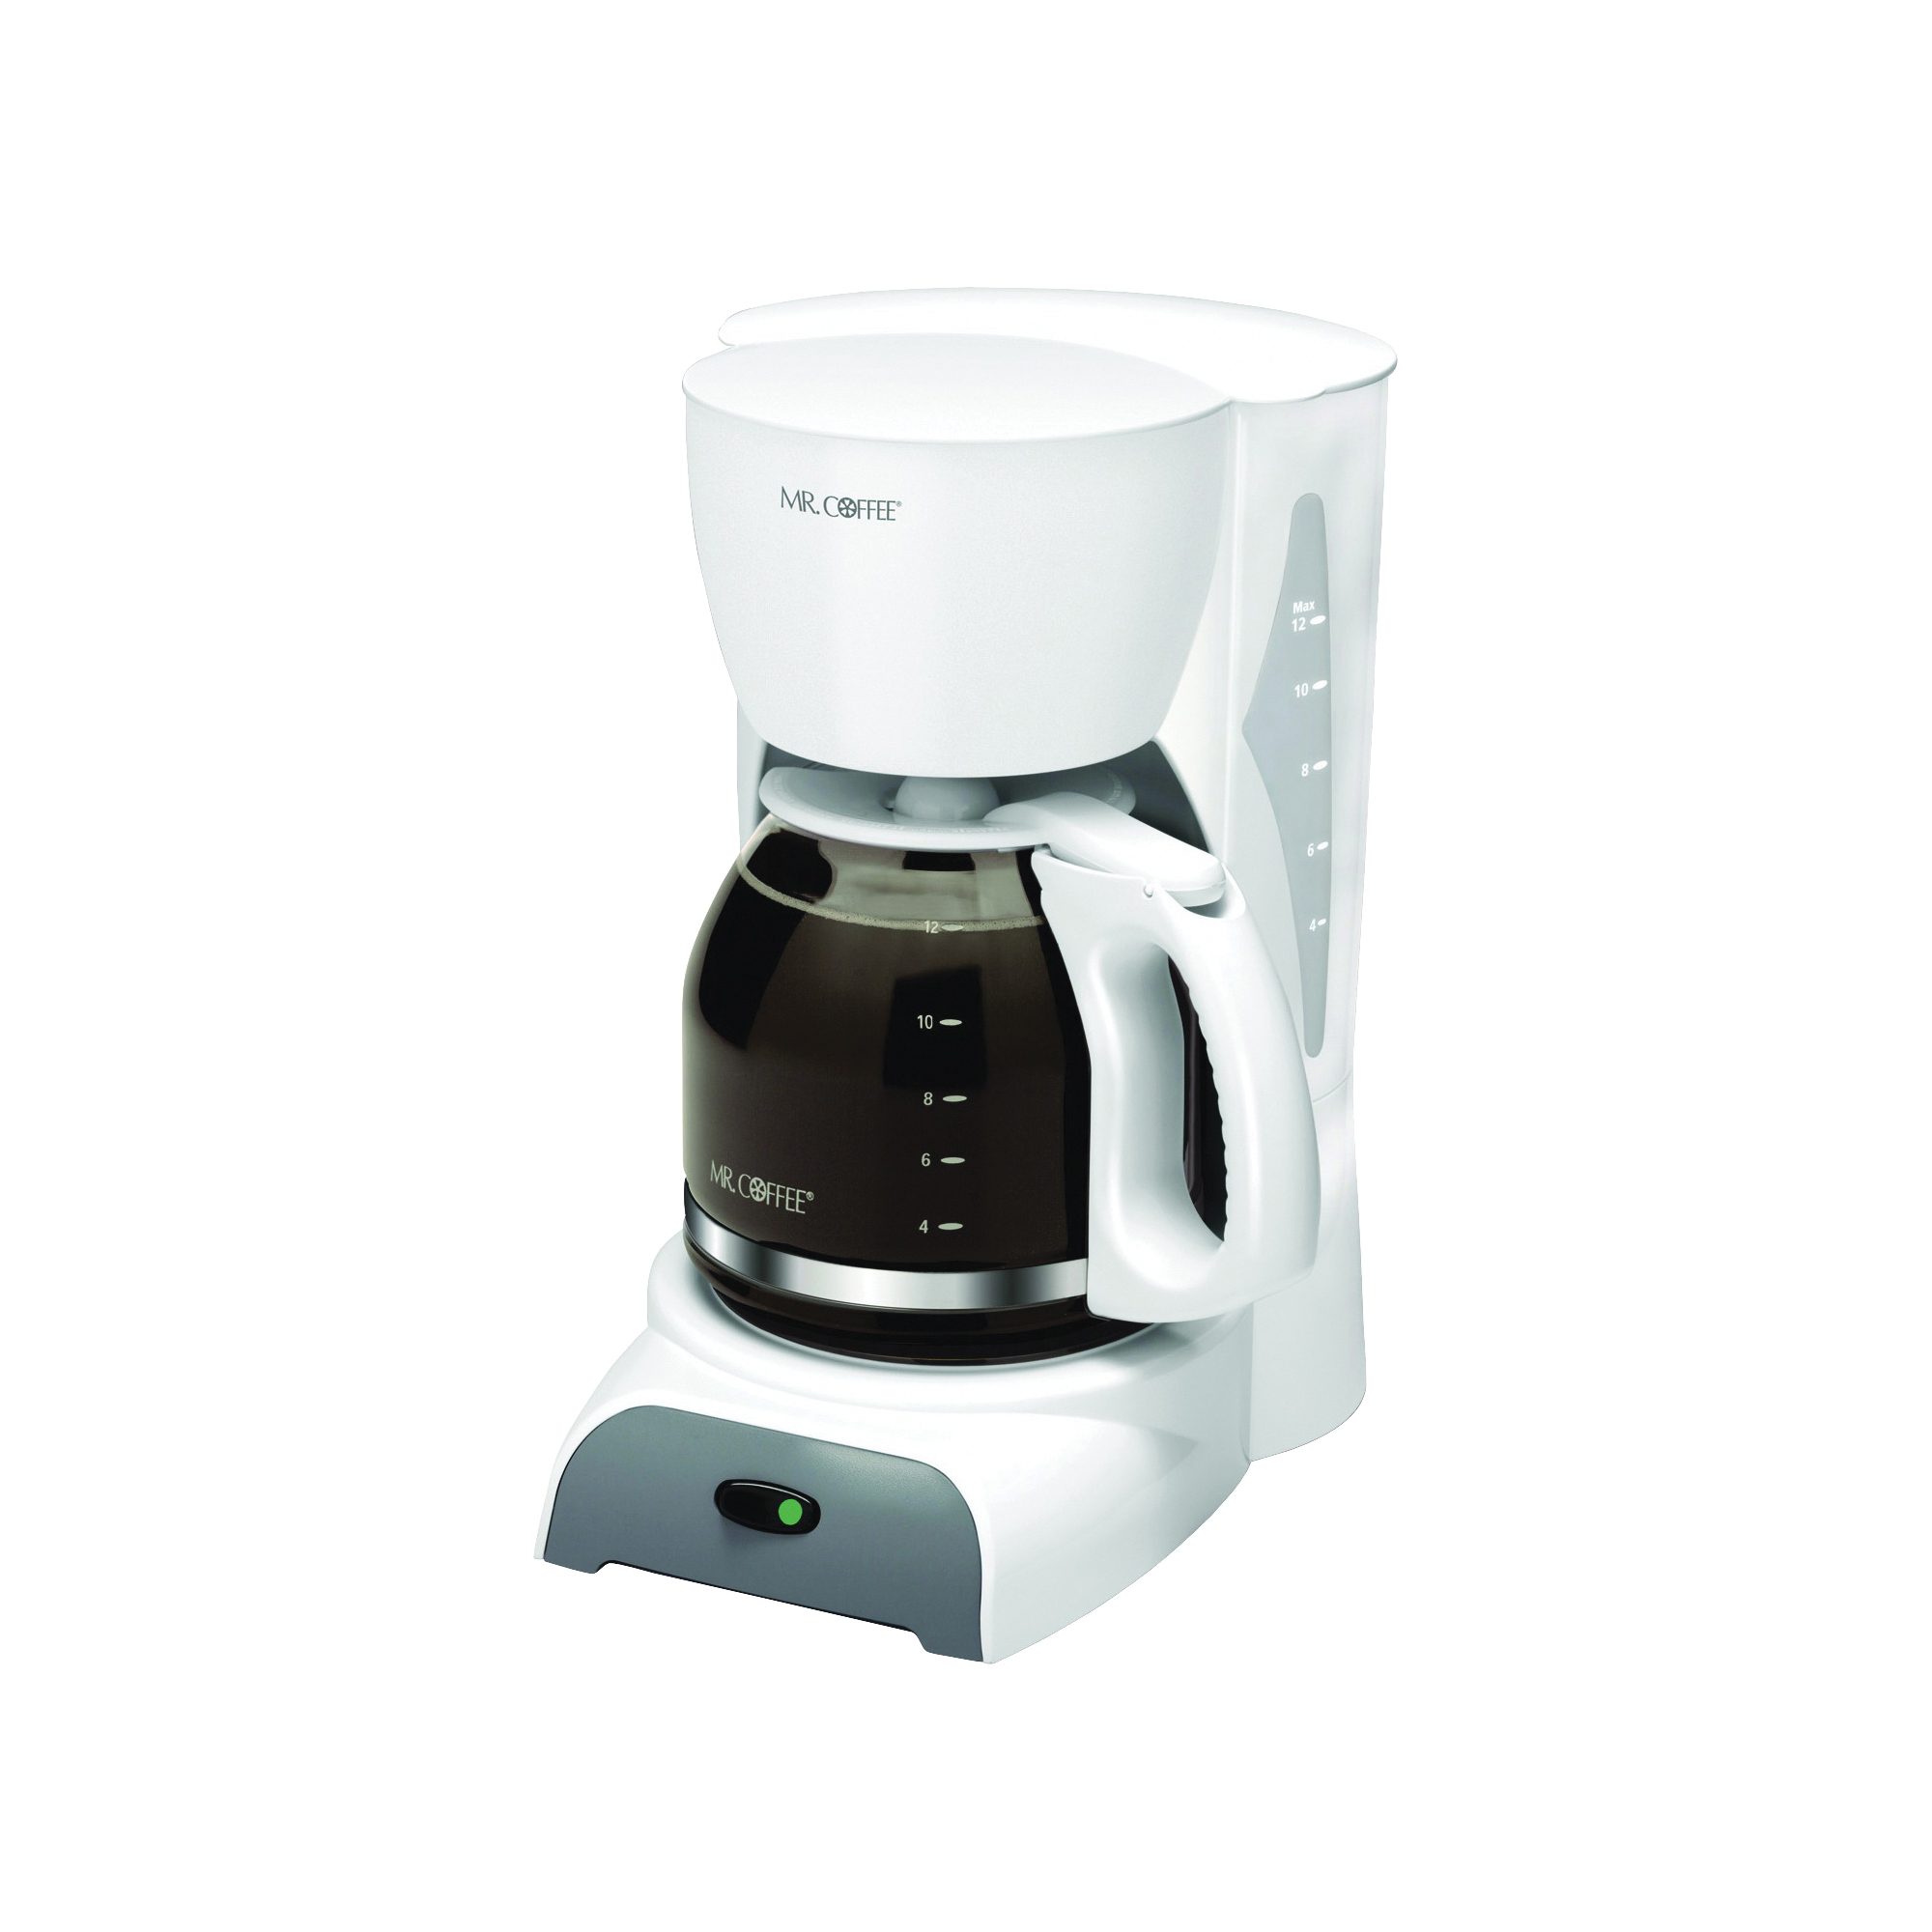 Mr. Coffee SK12-RB